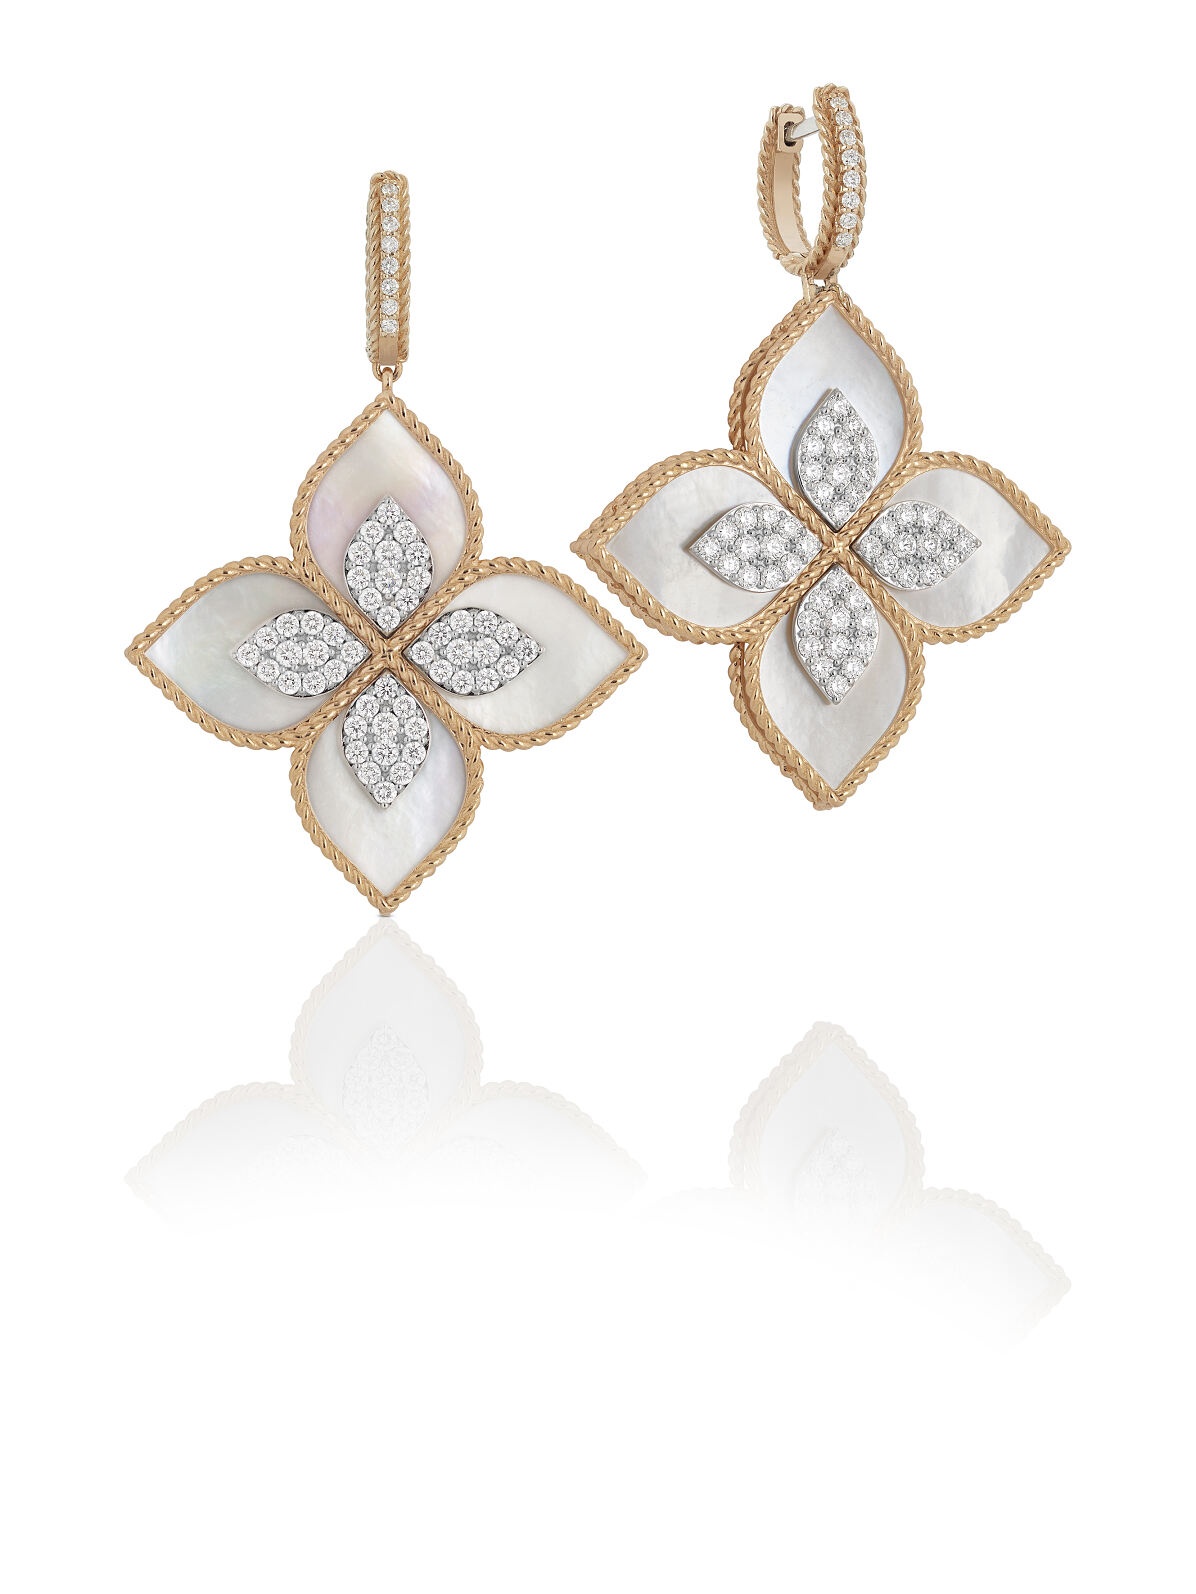 JUWELIER KRUZIK_Roberto Coin_Kollektion Princess Flower_Earrings in rose gold with mother of pearl and diamonds_Preis auf Anfrage